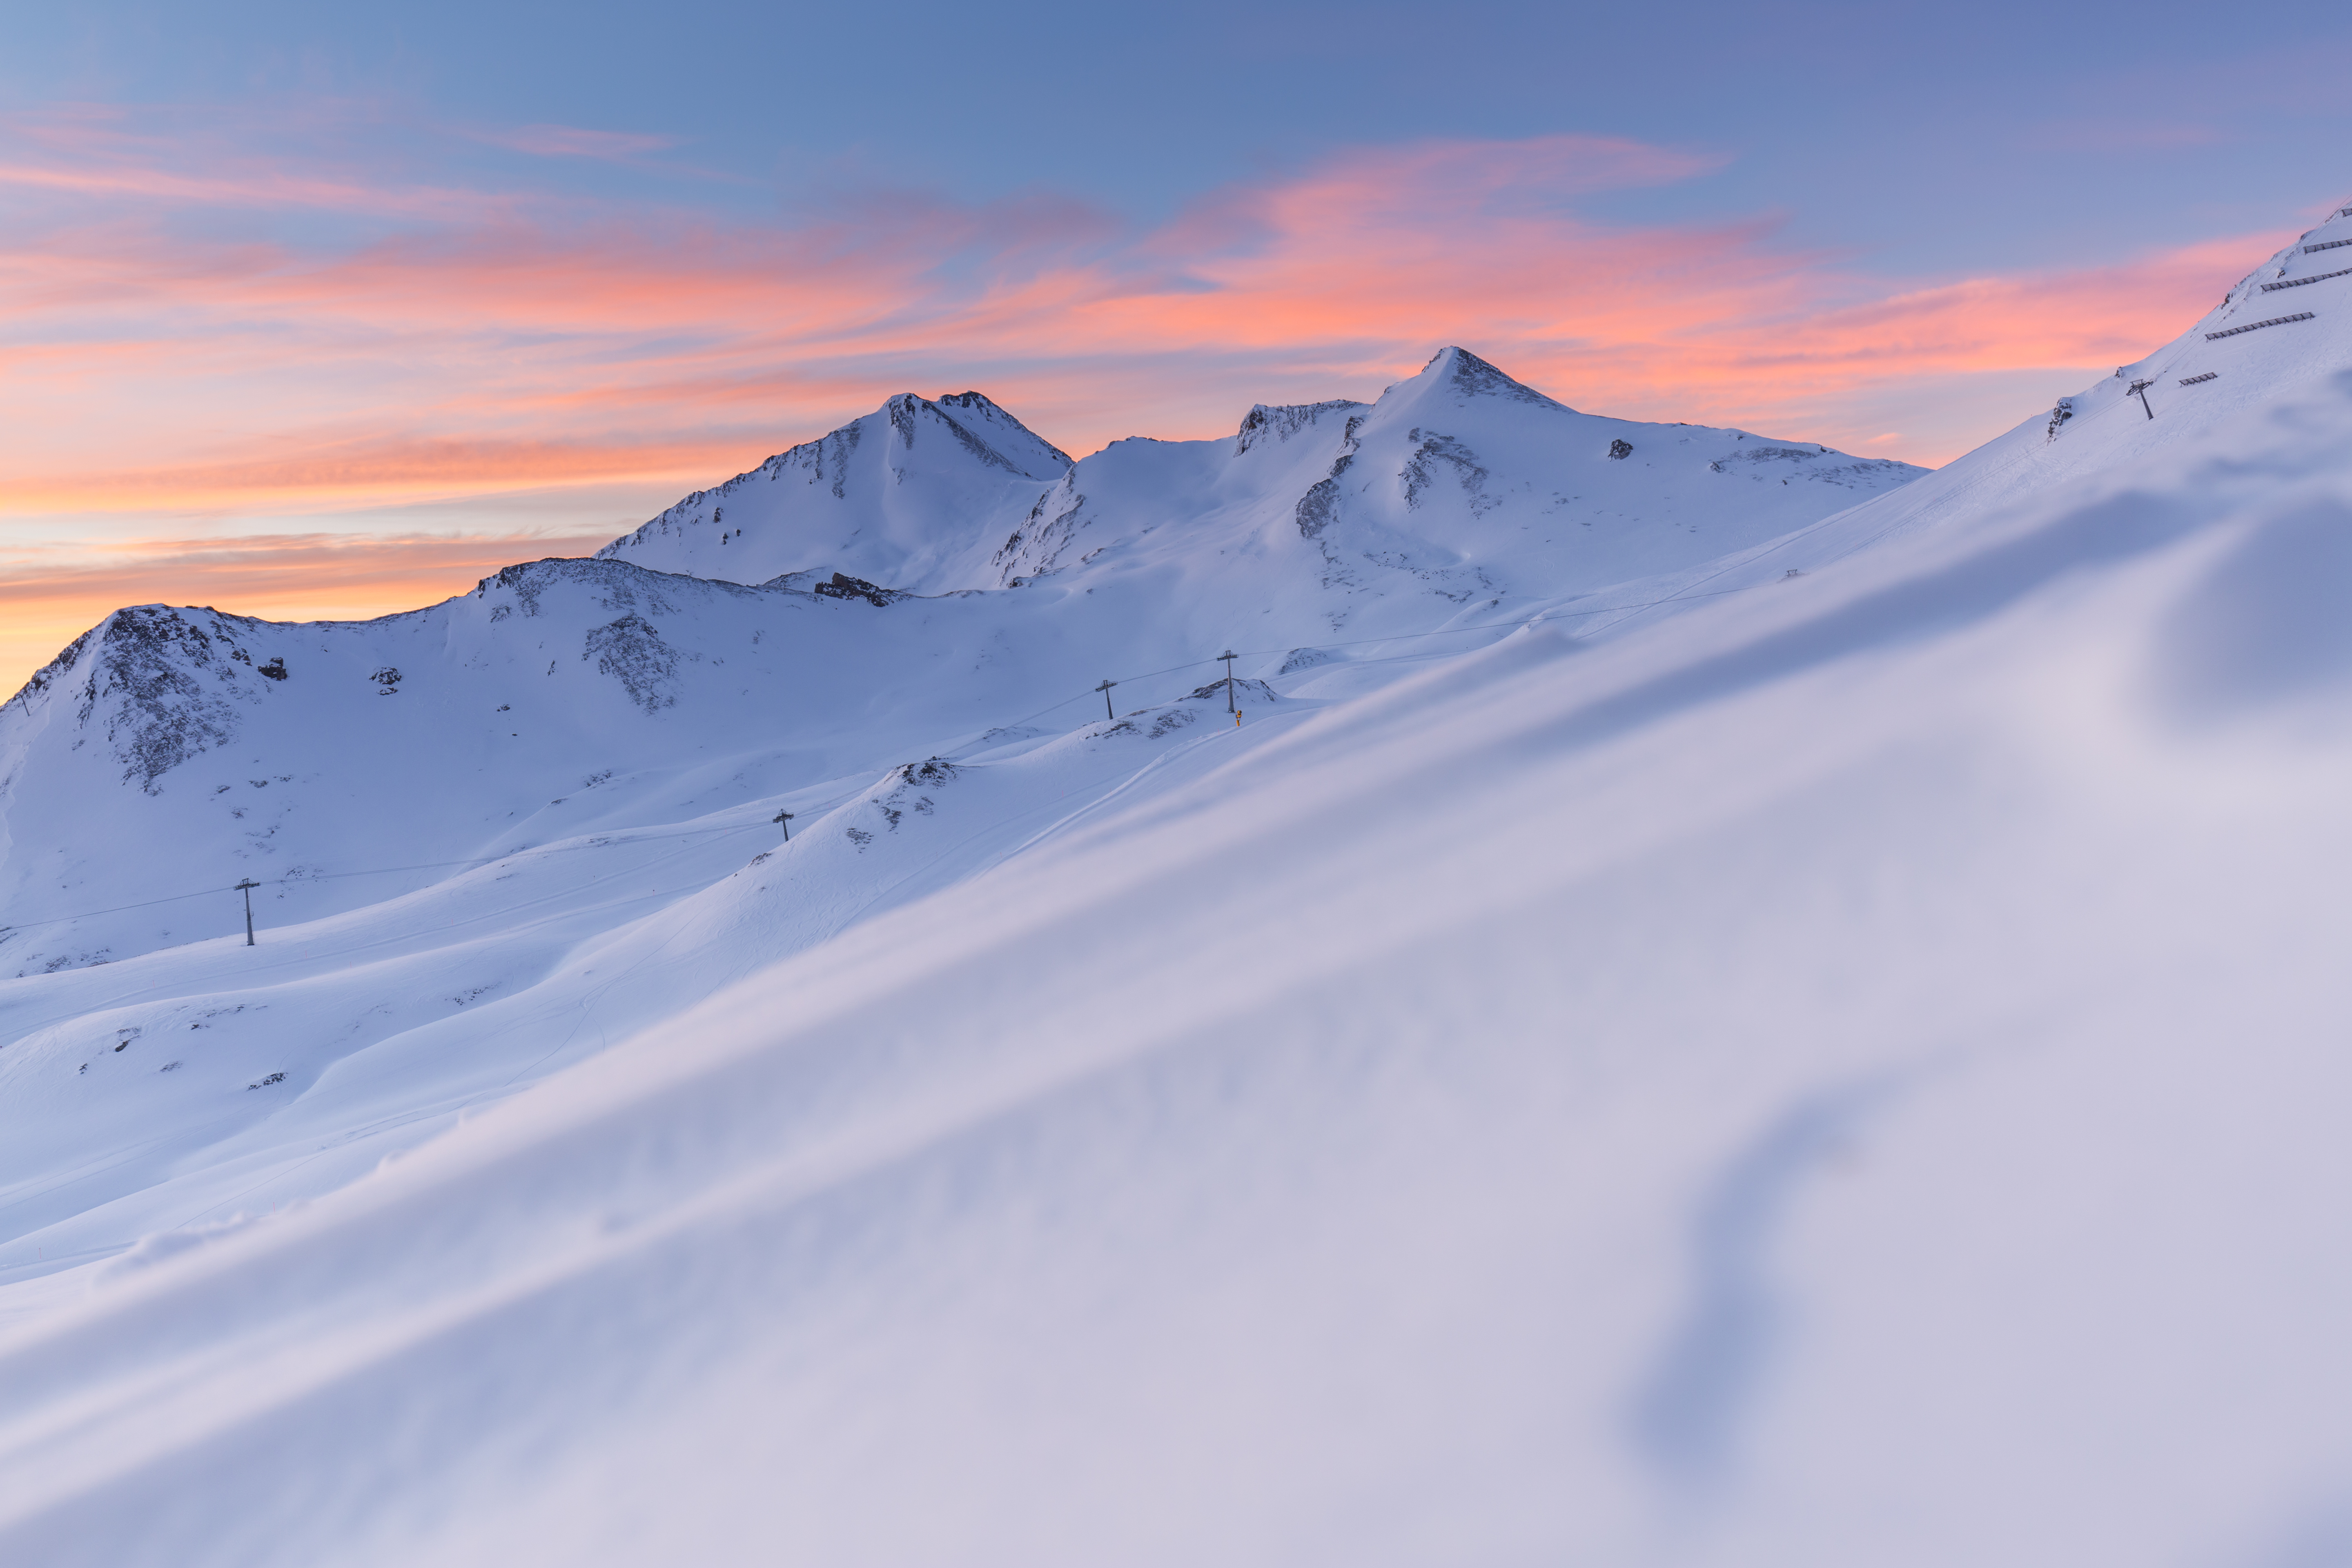 <p>Early risers can ride a piste groomer to the Hexenseehütte before sunrise, where a fine breakfast awaits, before hitting the slopes. An unforgettable experience.</p>
